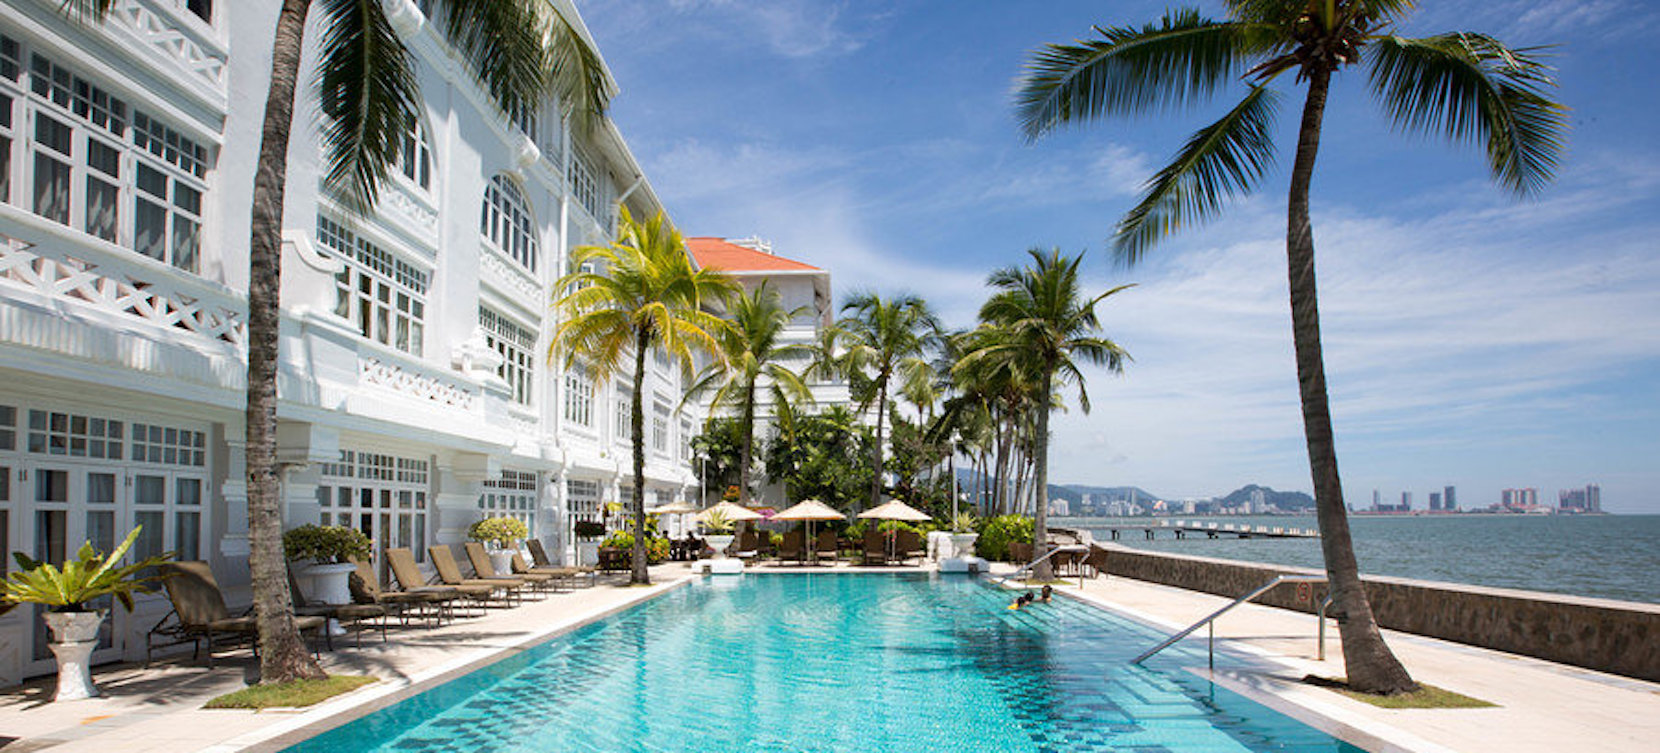 The Eastern & Oriental Hotel , George Town / Penang / Malaysia 